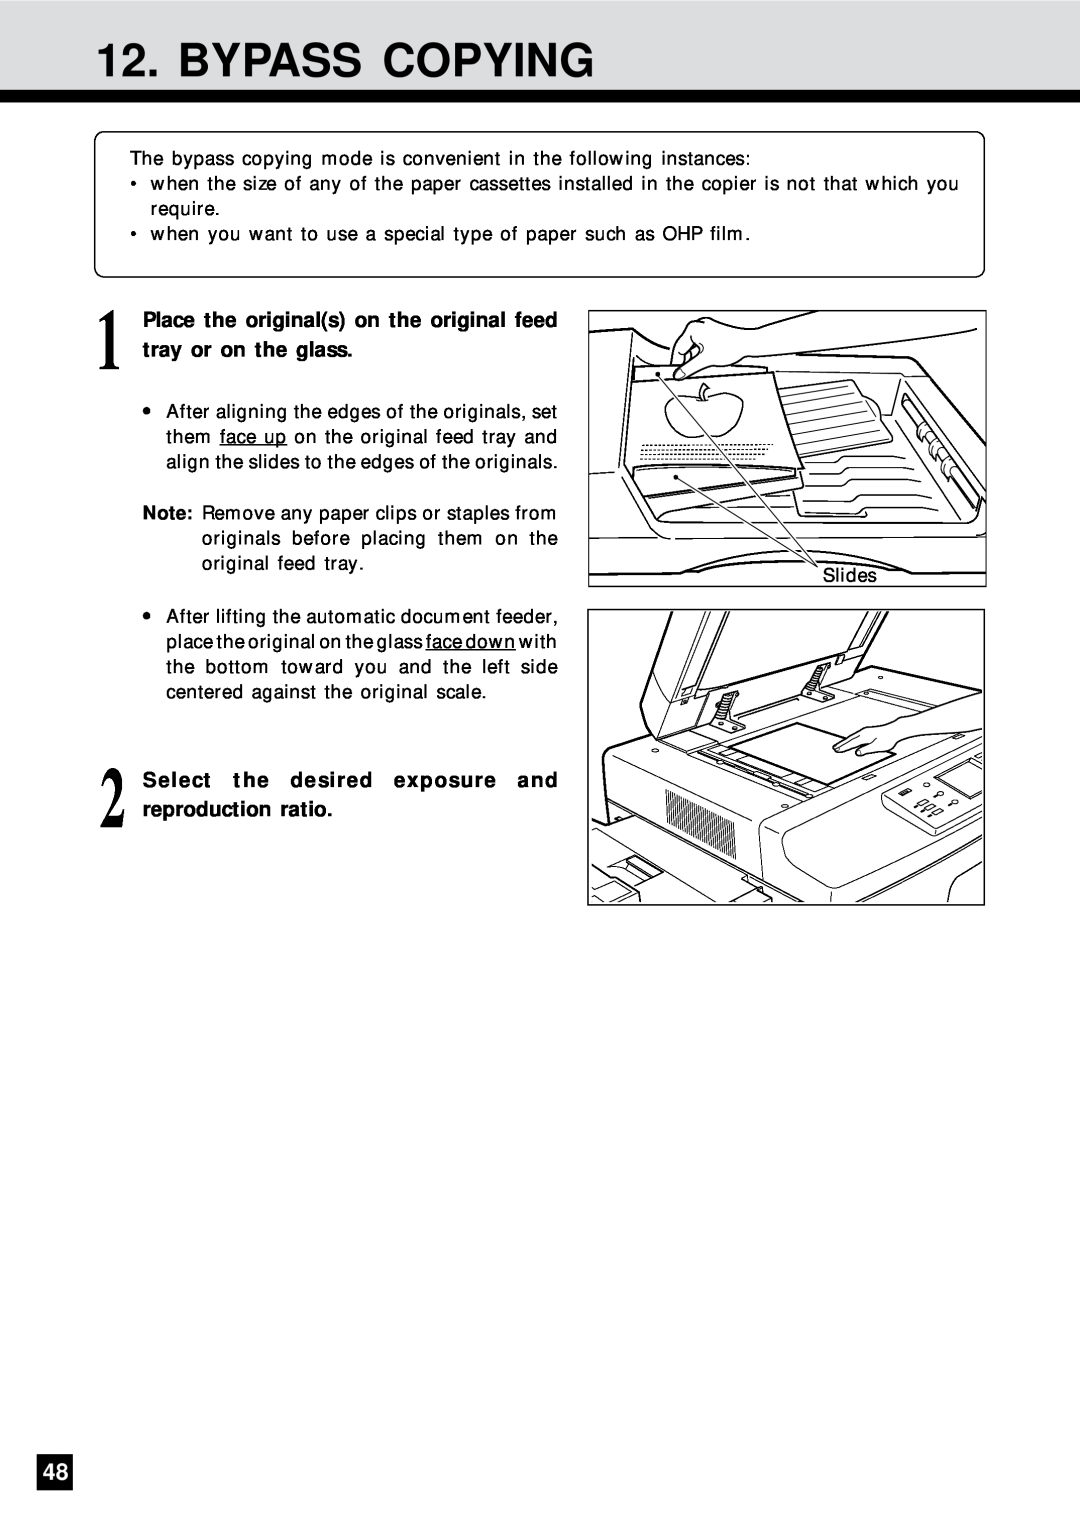 Sharp AR-650 operation manual Bypass Copying, Select the desired exposure and reproduction ratio 